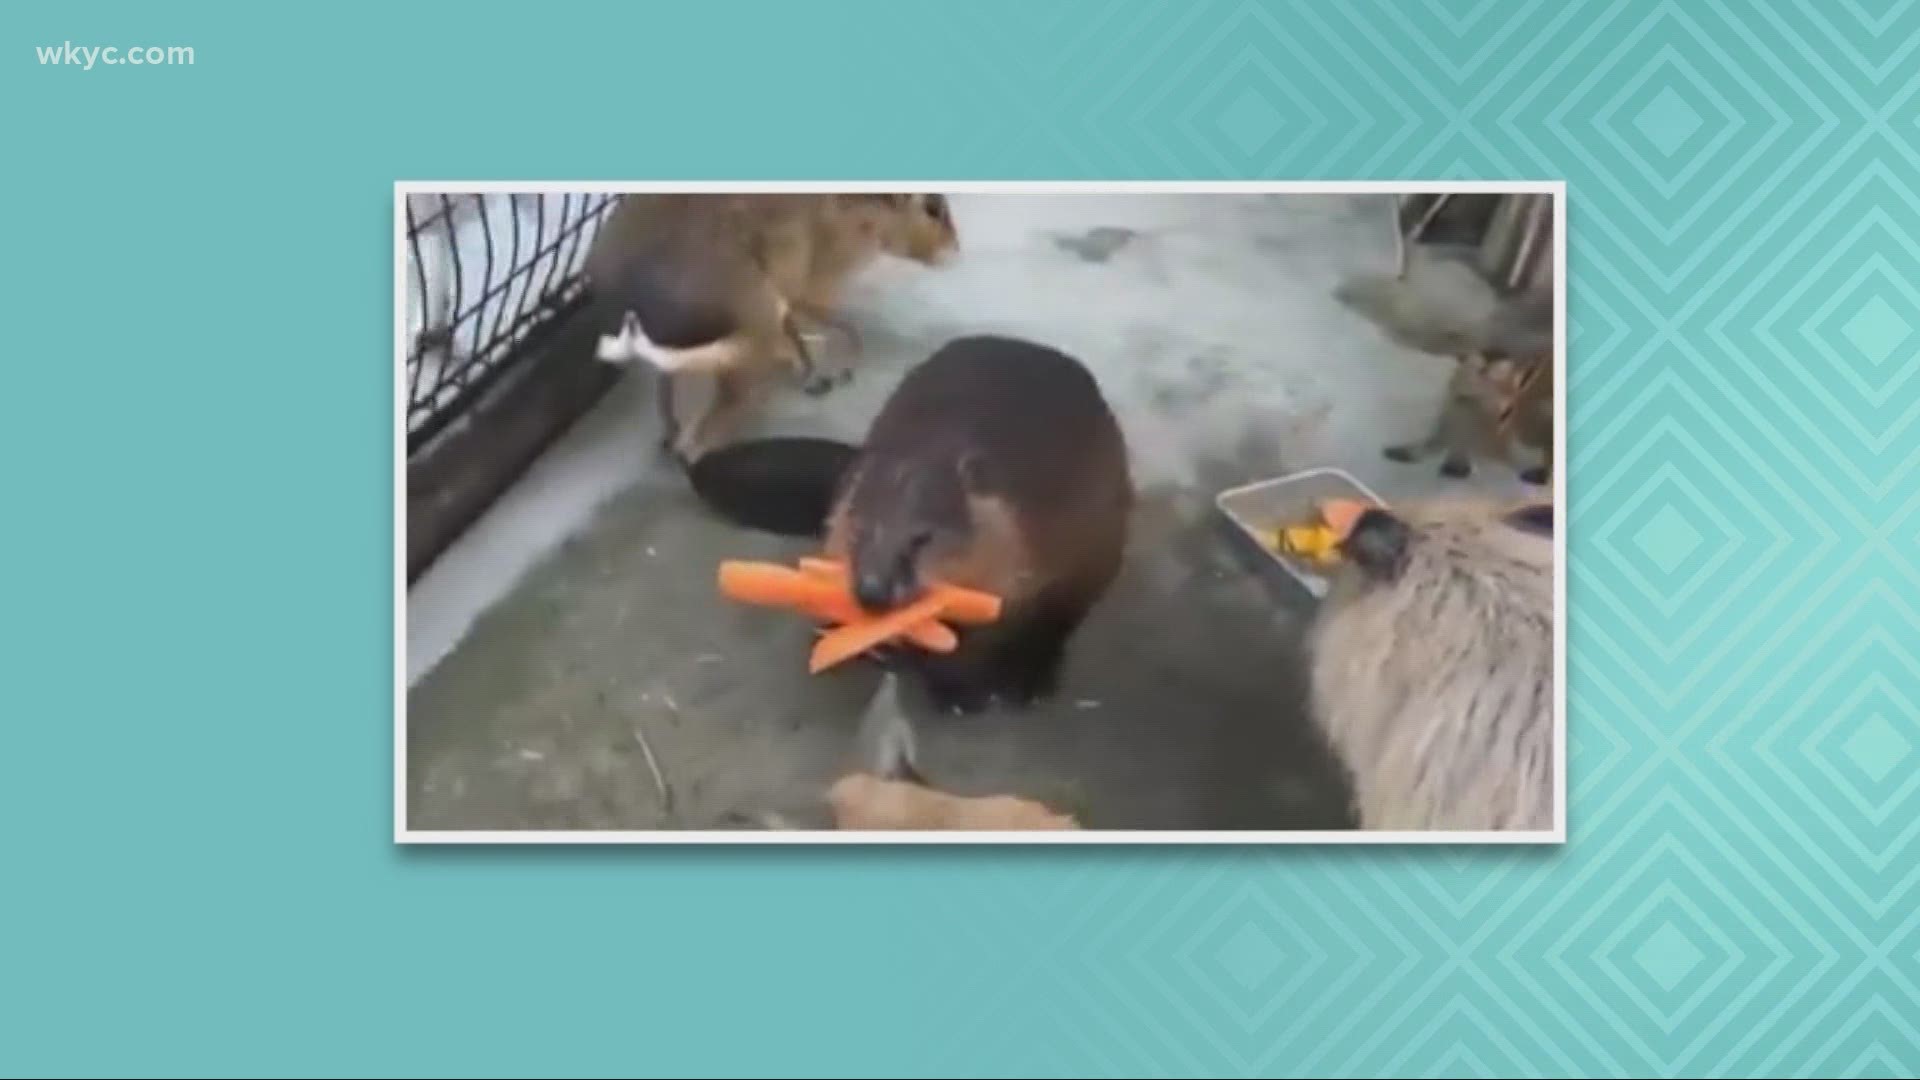 It's time for our worth the watch video.  Check out this video.  This beaver had a heck of a time carrying 3 large sized carrots.